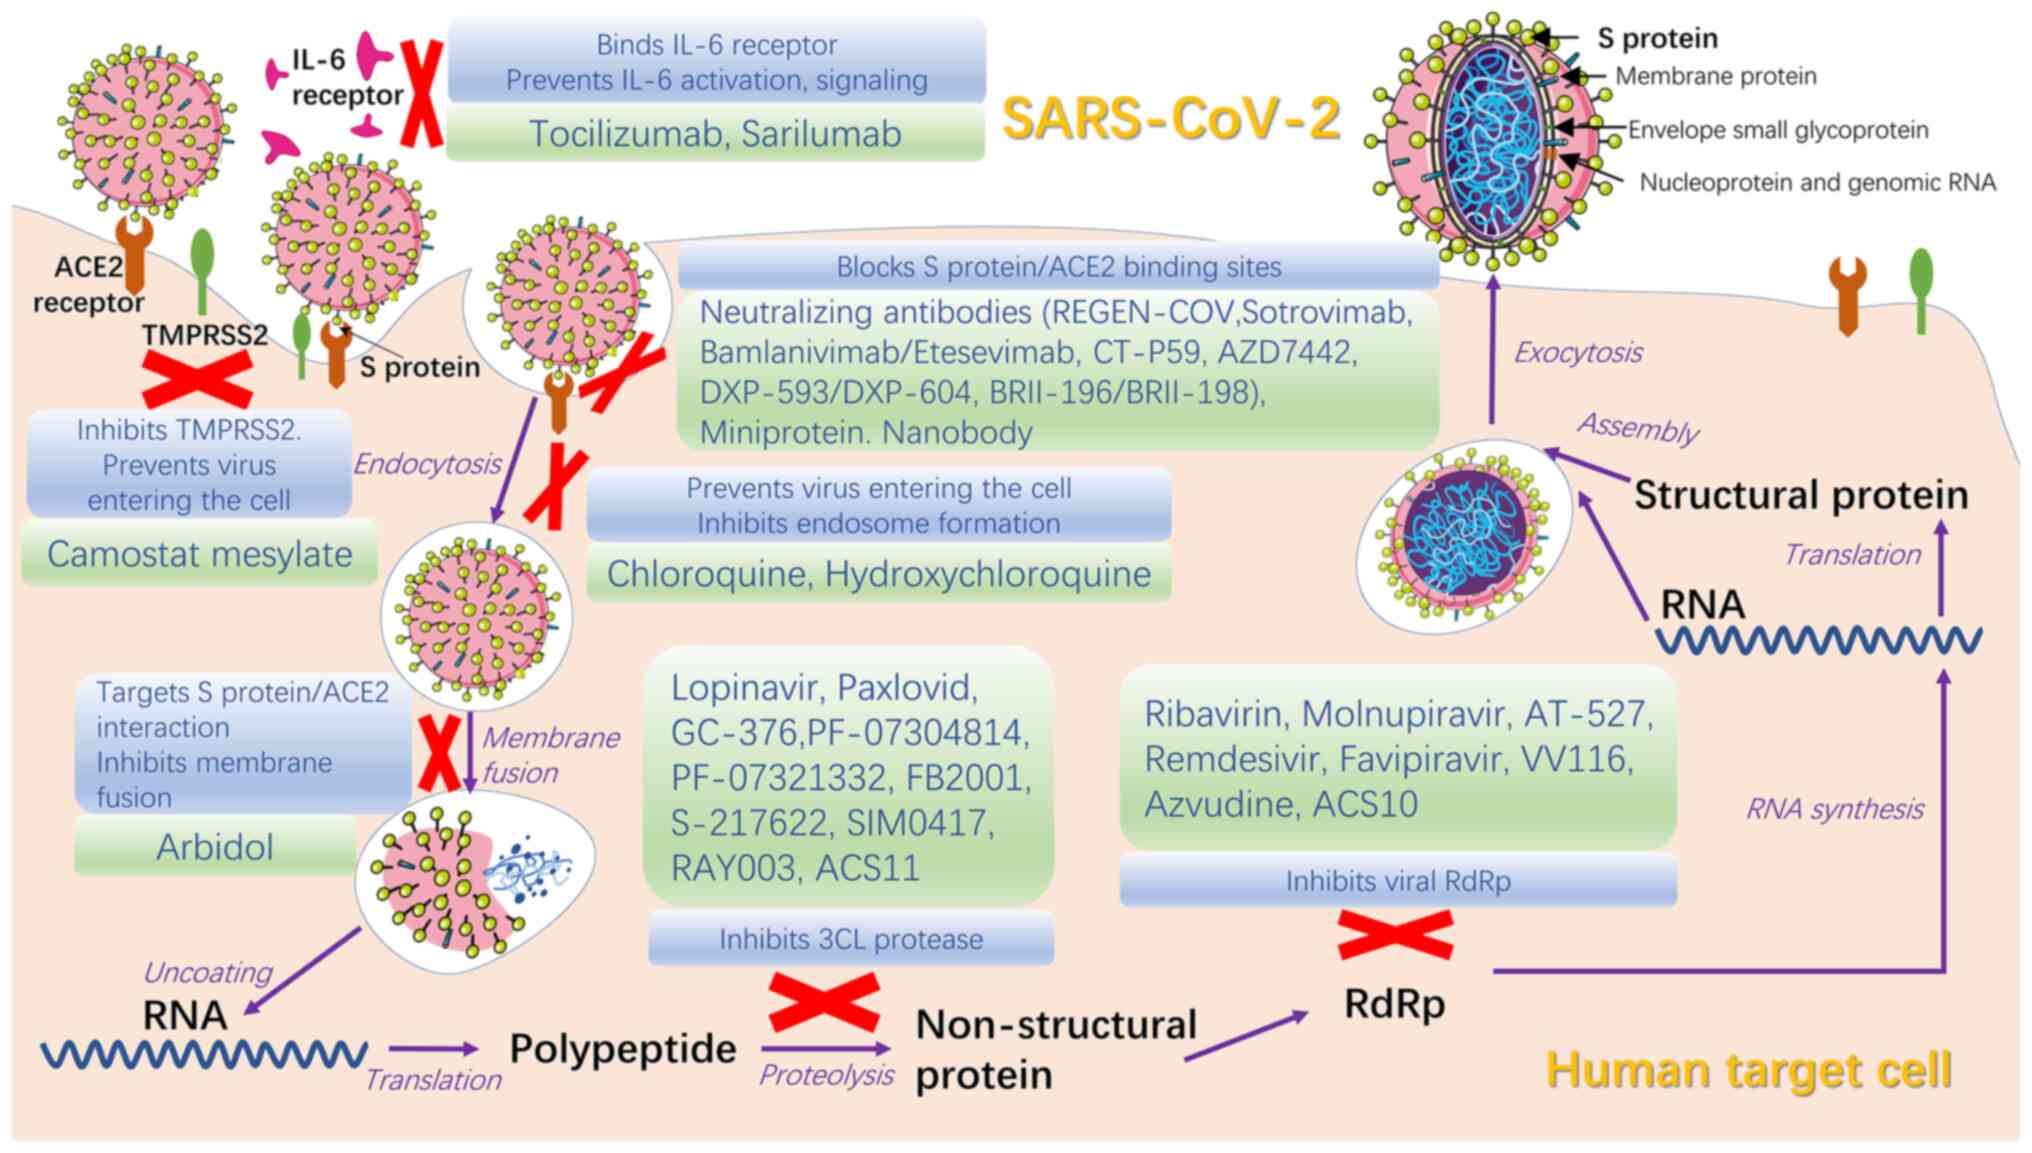 Viruses  Topical Collection : SARS-CoV-2 and COVID-19